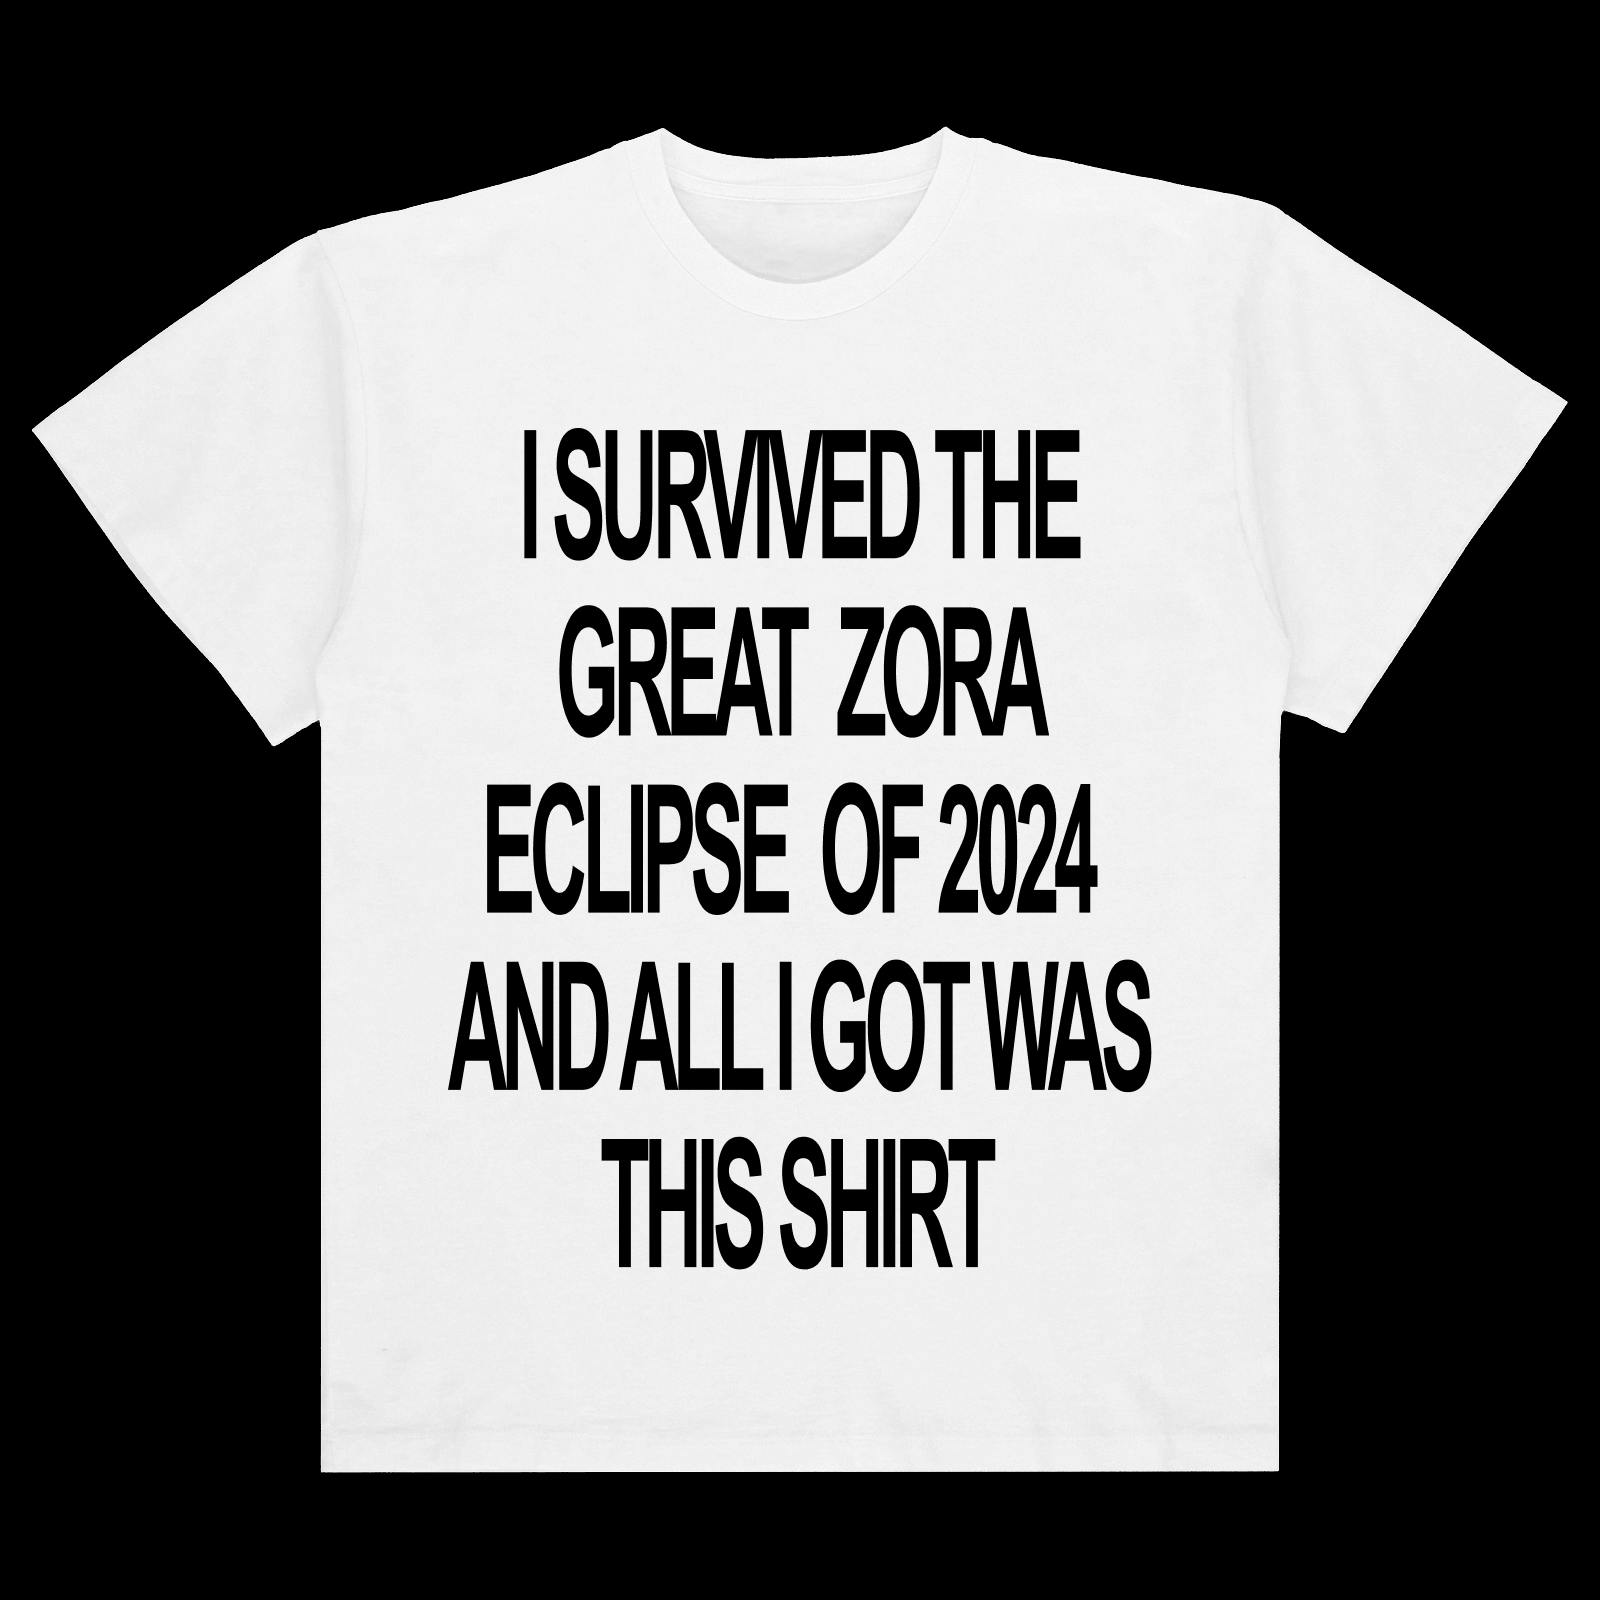 i survived the great zora eclipse of 2024 and all i got was this shirt